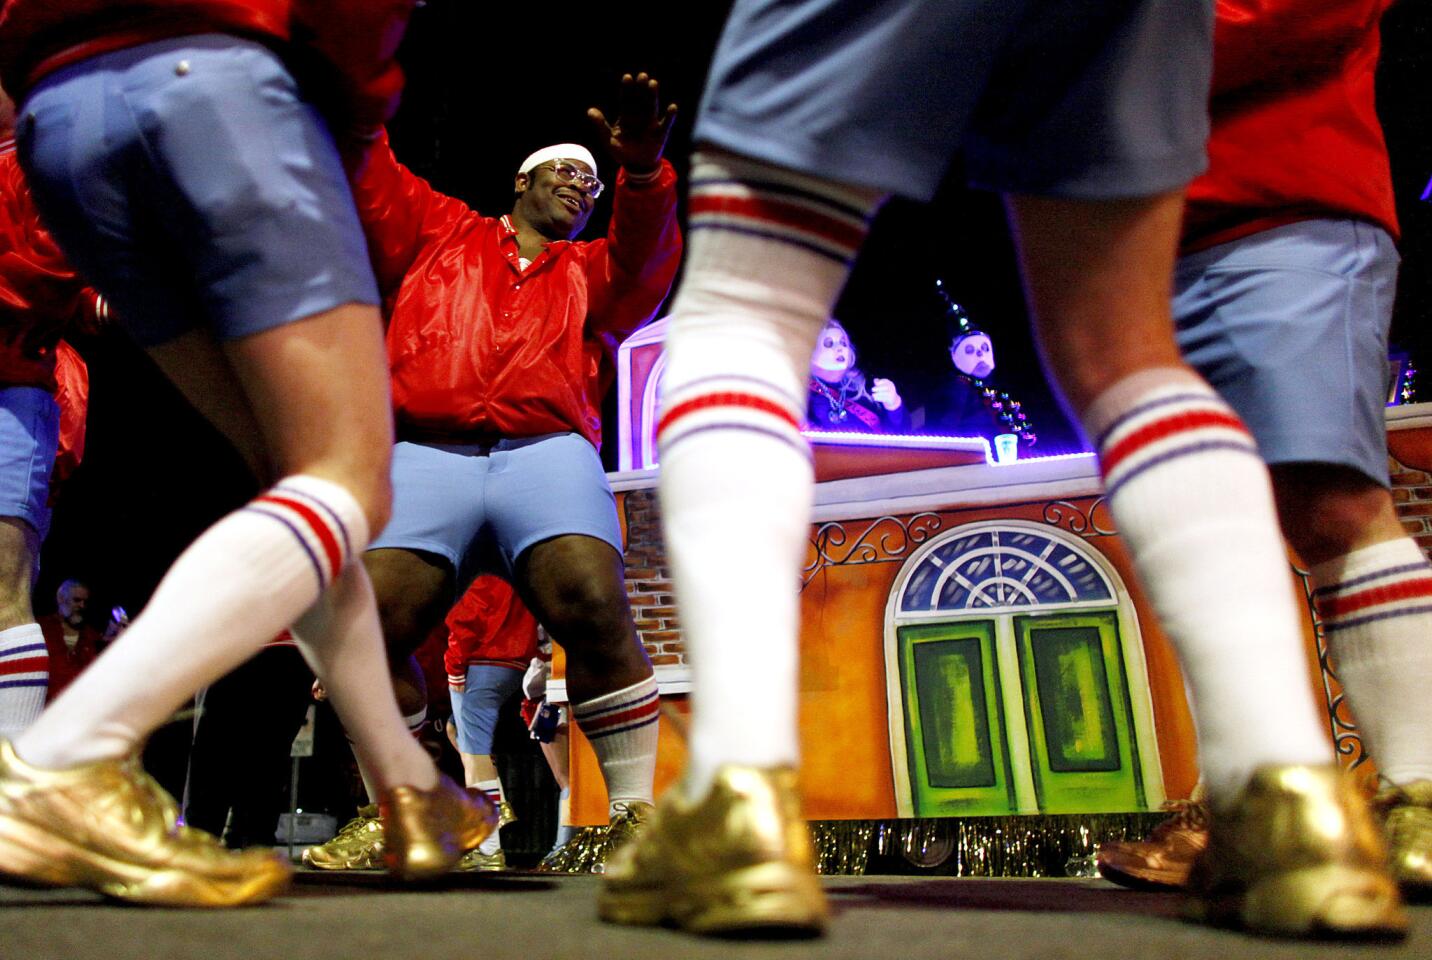 Dante Hale of the 610 Stompers, an all-male marching club, does a warm-up dance with fellow Stompers. The men have no formal dance experience but are the type who are traditionally first on the dance floor at any event.